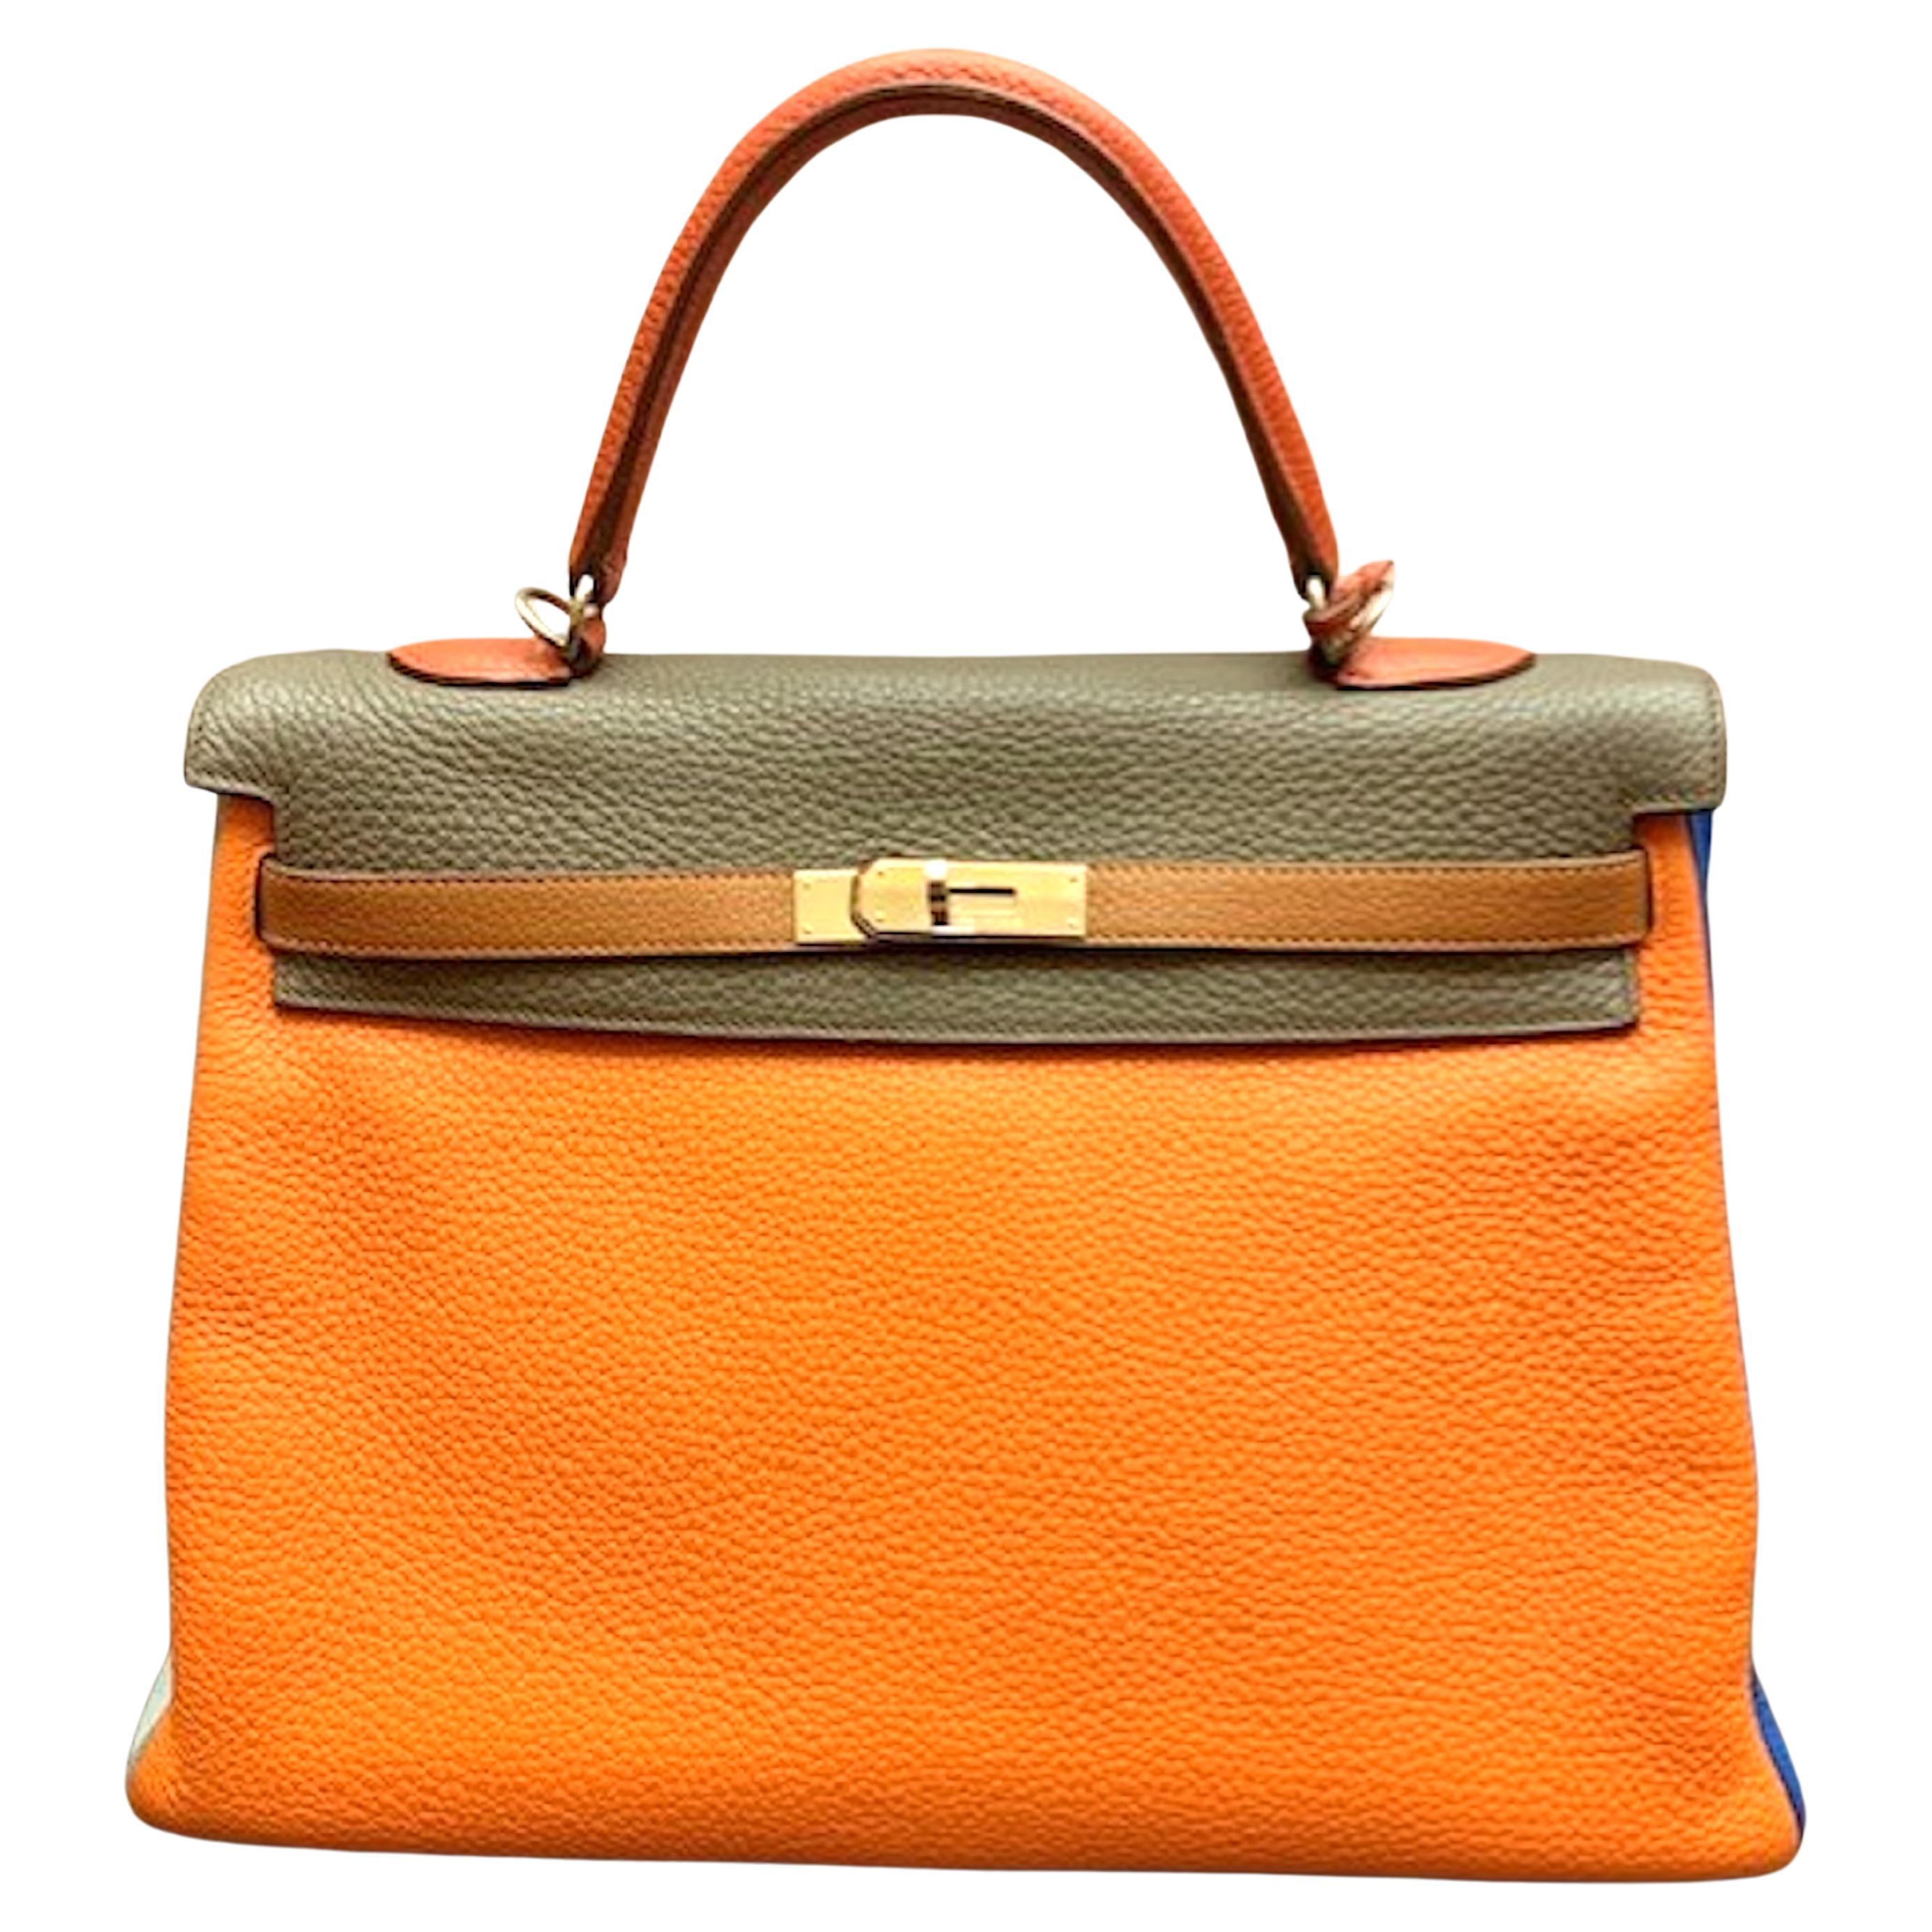 What is the most wanted Hermès bag?